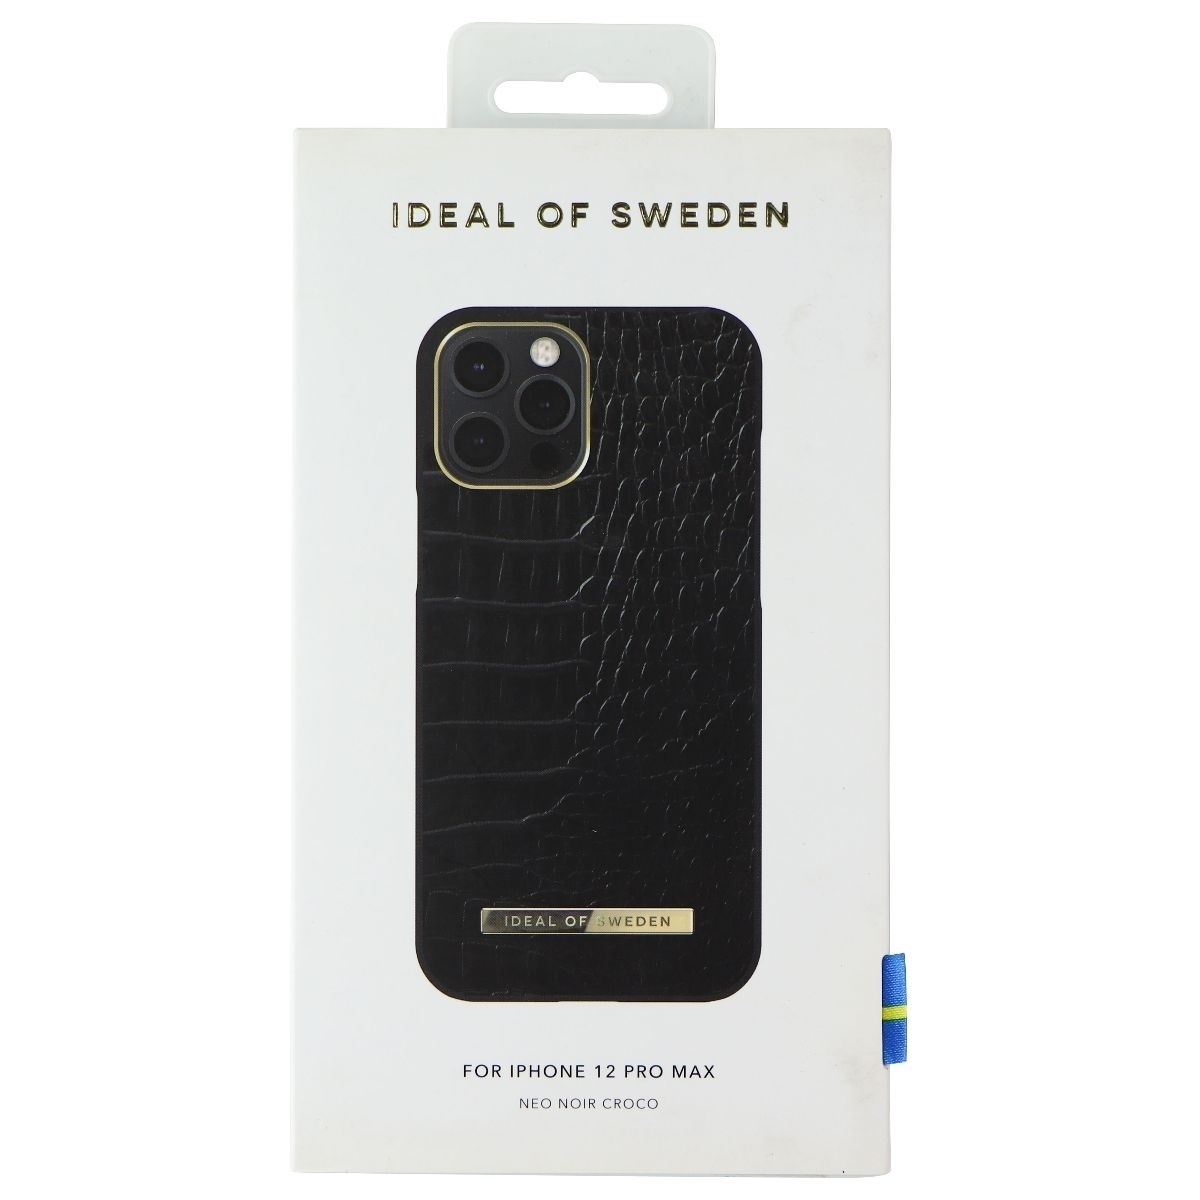 IDeal Of Sweden Neo Noir Croco Case For Apple IPhone 12 Pro Max - Black